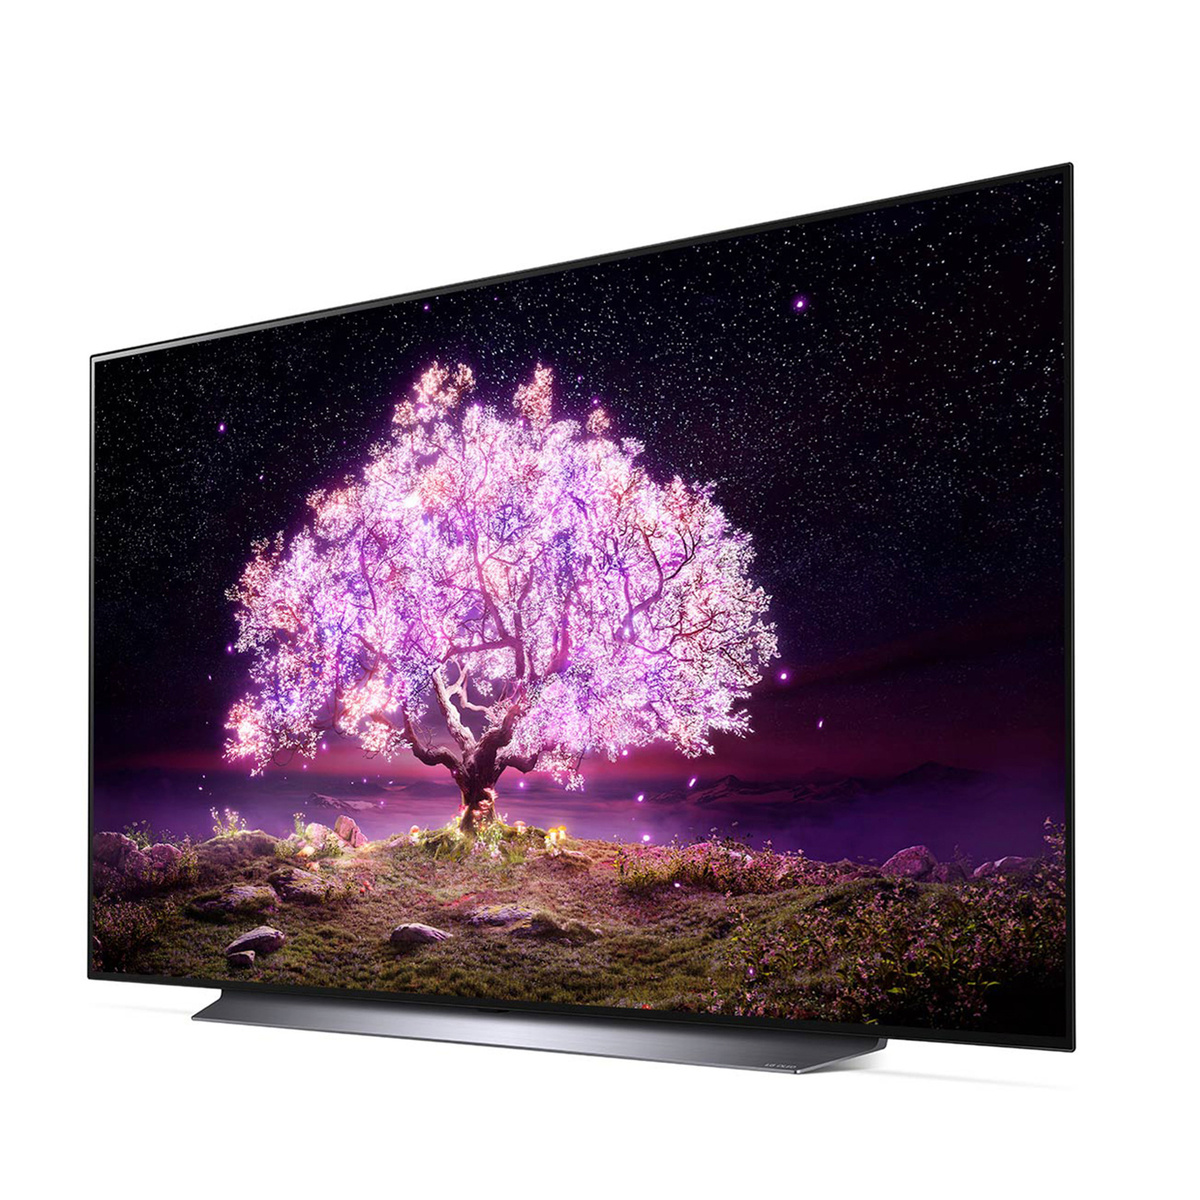 LG OLED TV 77 Inch C1 Series Cinema Screen Design, NEW 2021, 4K Cinema HDR webOS Smart with ThinQ AI Pixel Dimming